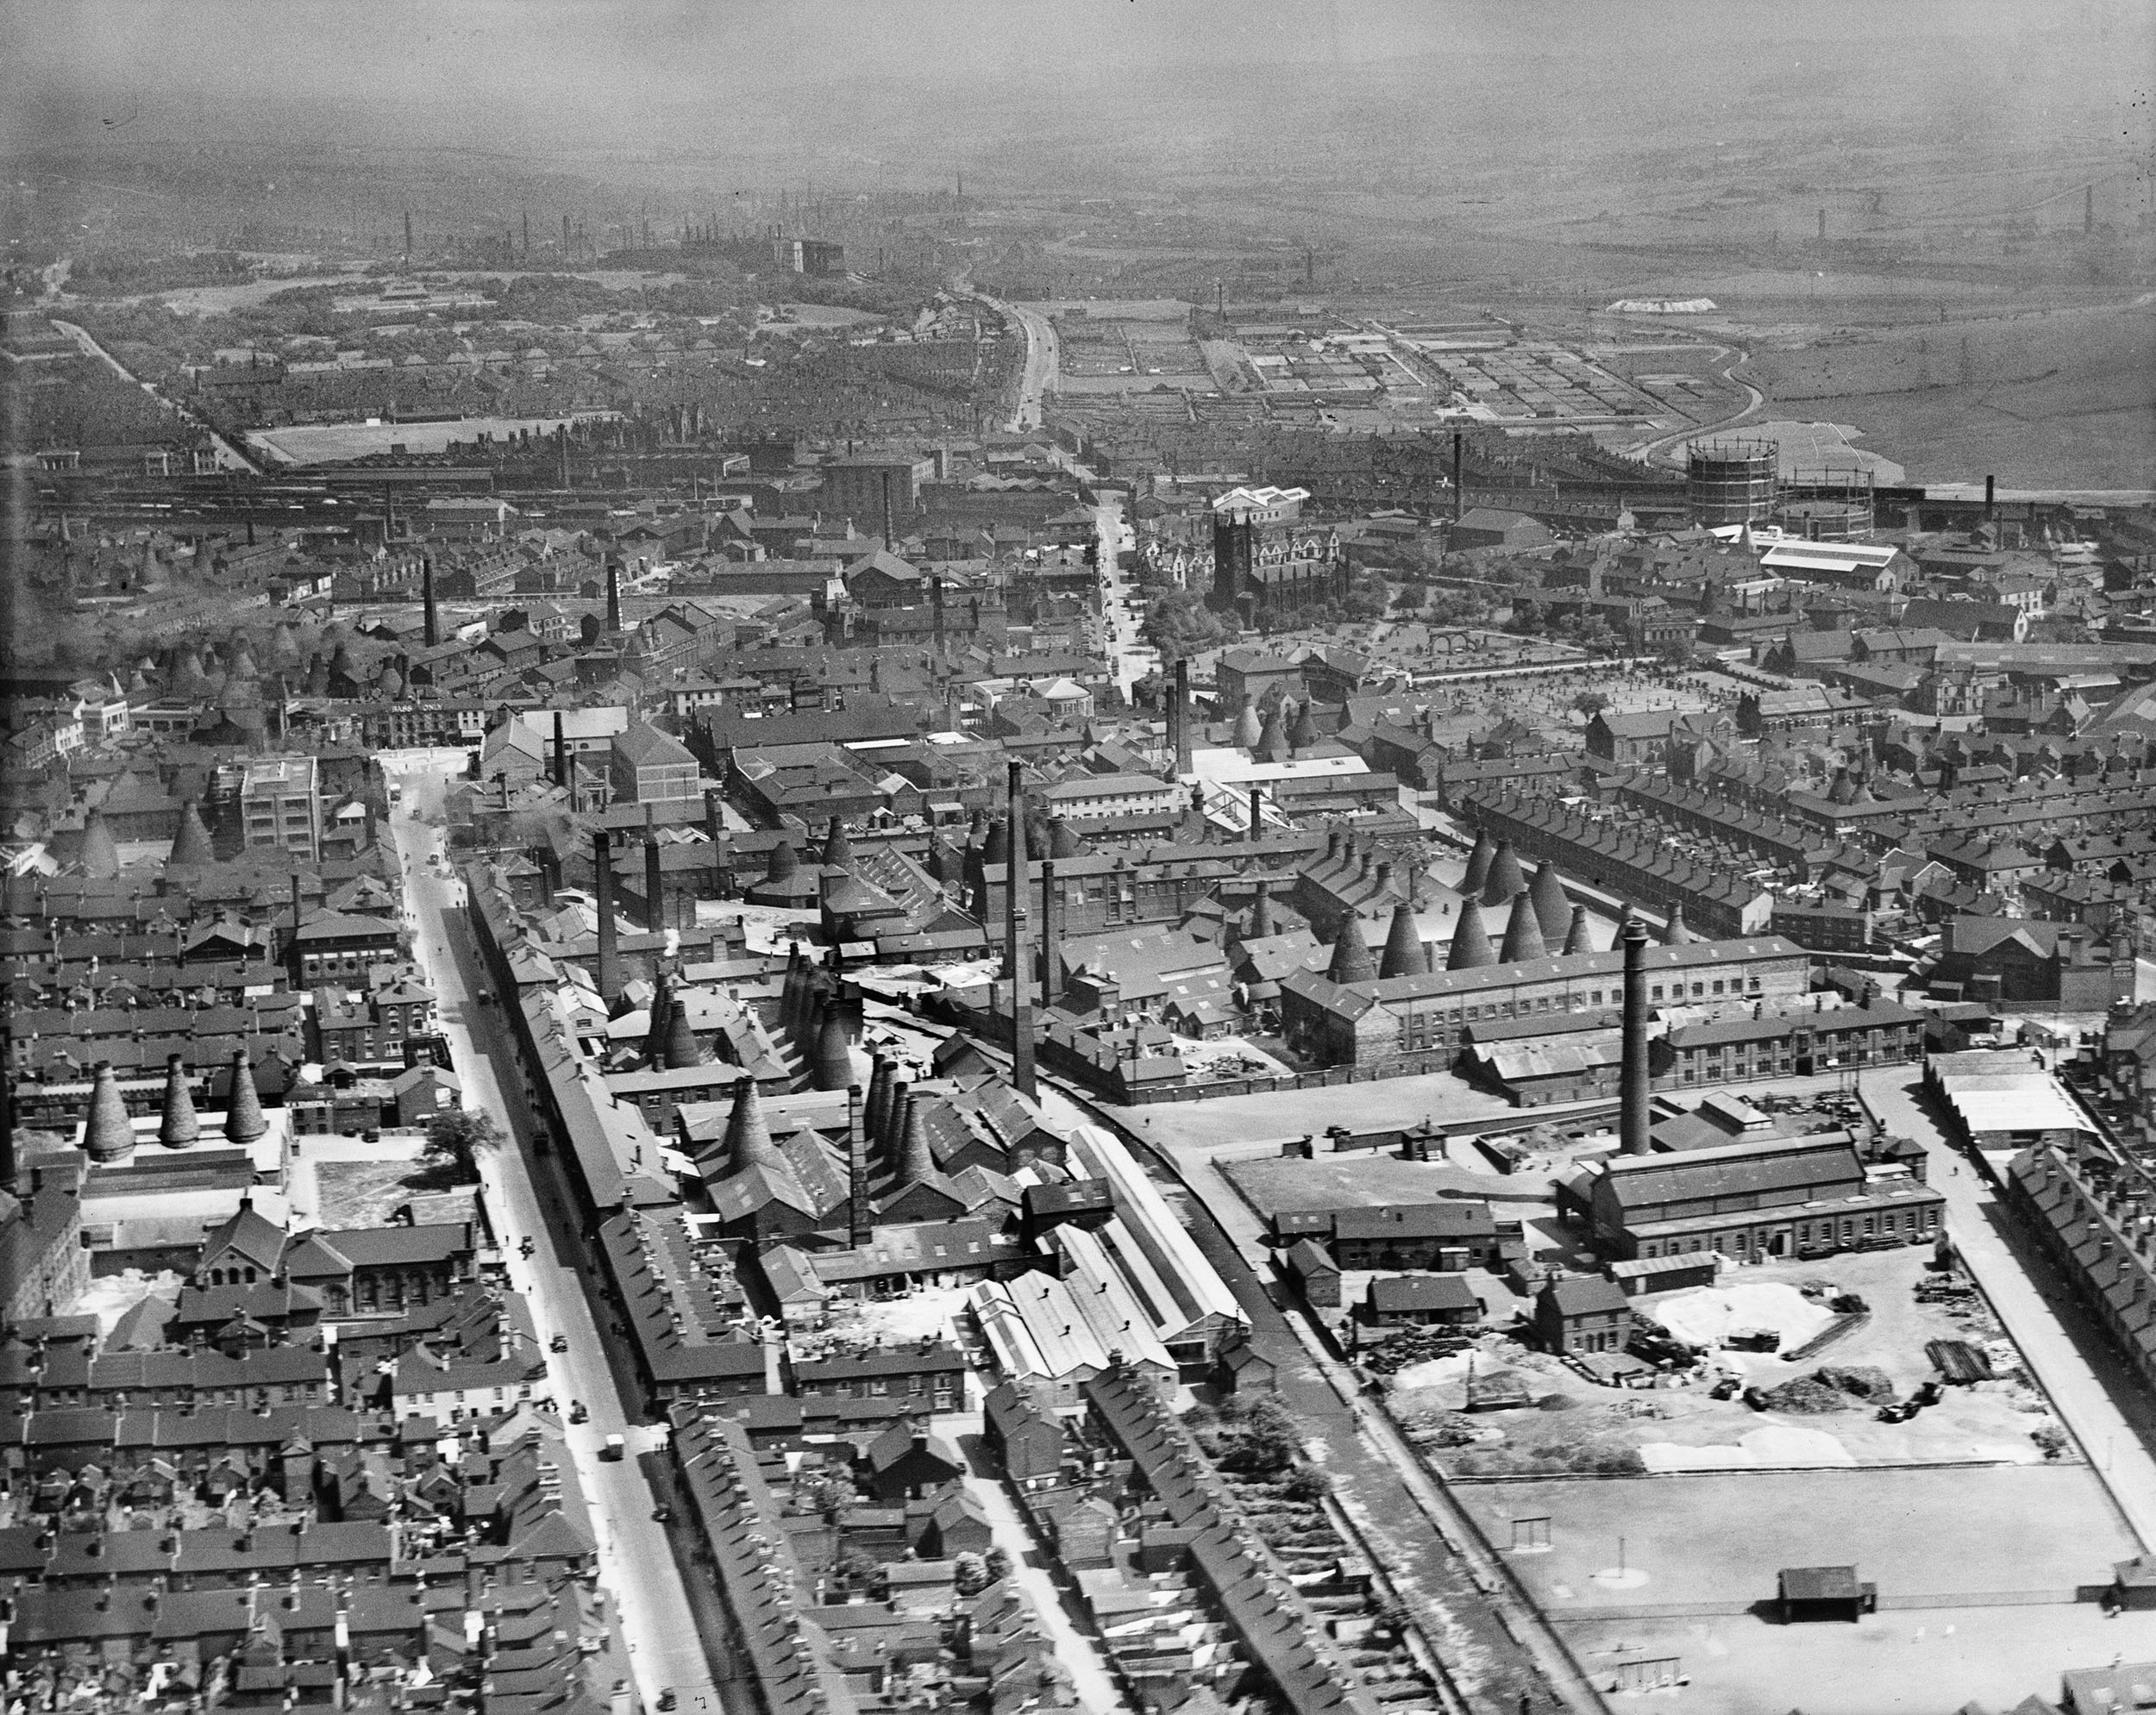 Black and white aerial photo of stoke on trent with lots of cone shaped kiln chimneys